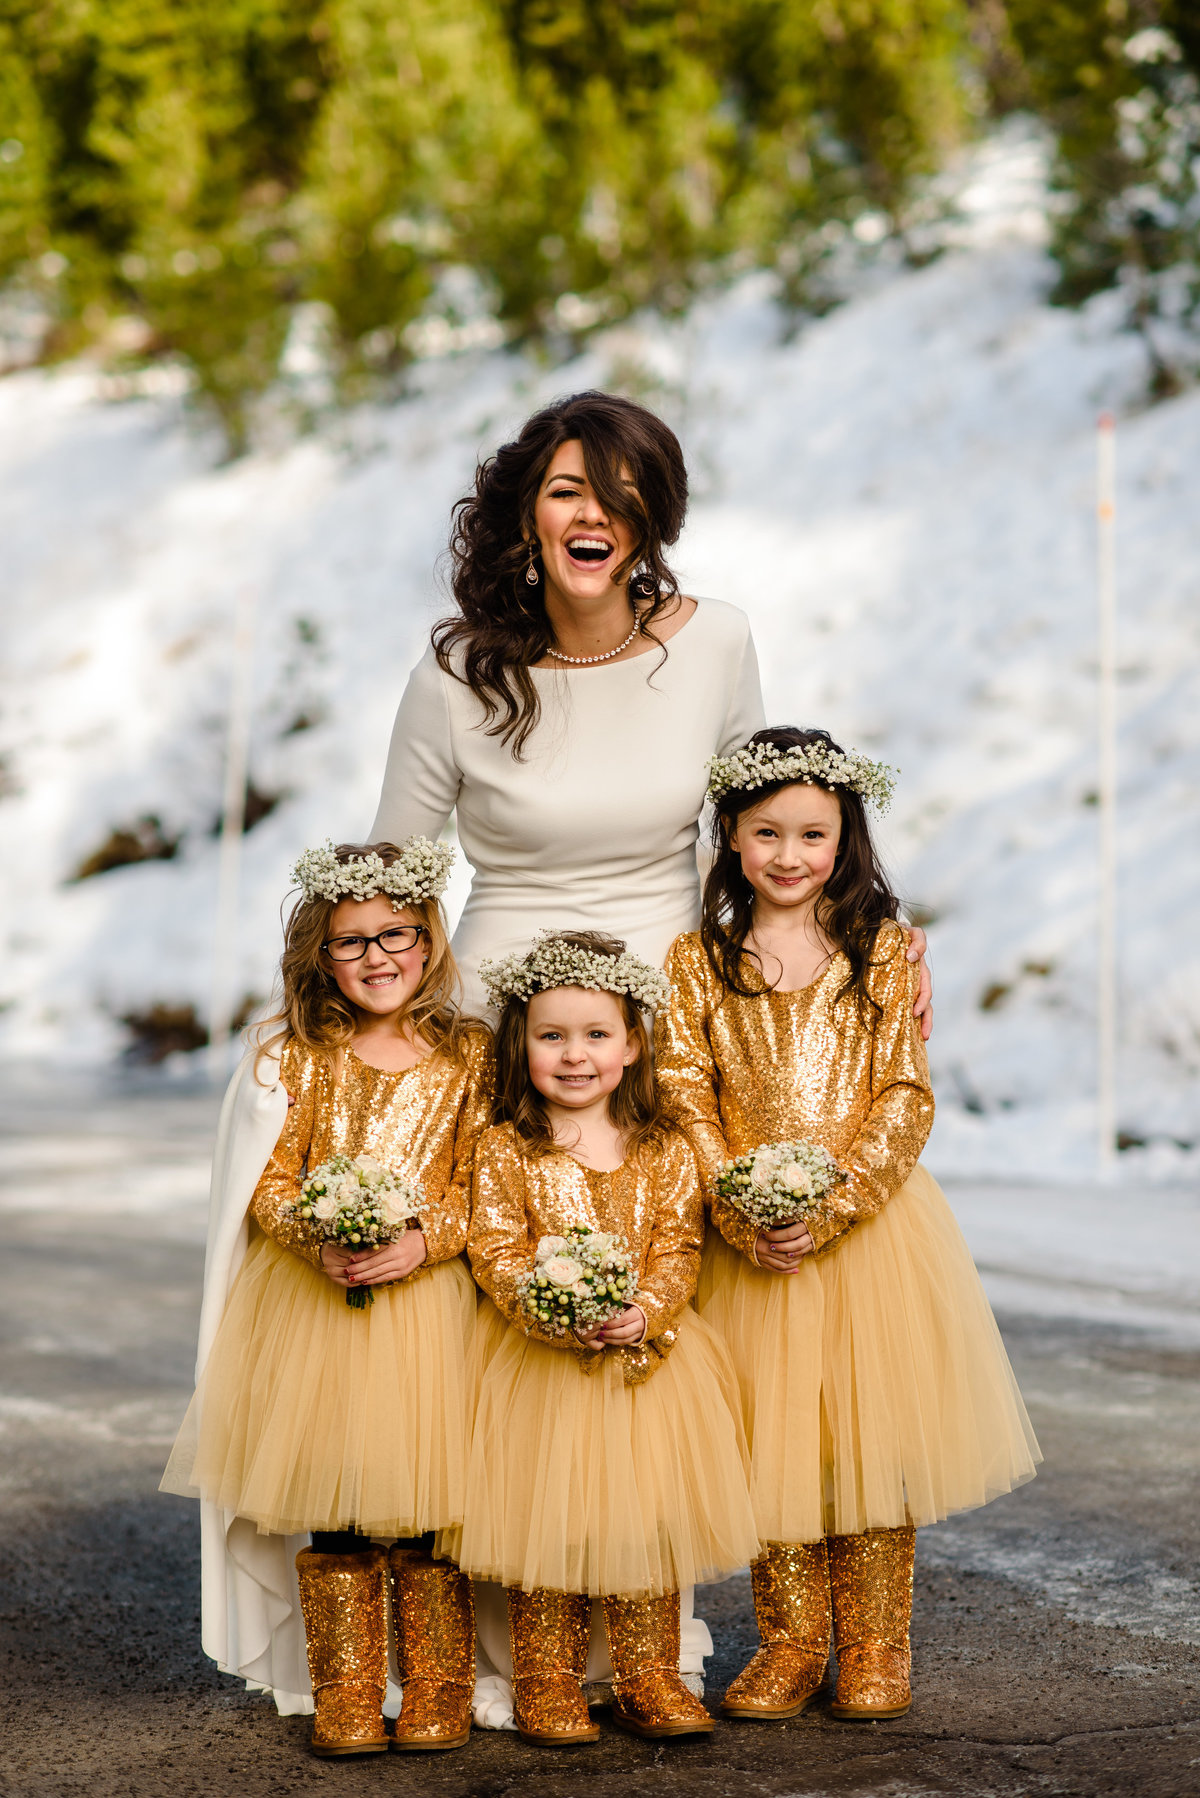 Lake Tahoe Wedding Planners bride in snow 3 flower girls in gold sequins, winter wedding at venue The Resort at Squaw Creek, Lake Tahoe, Joy of Life Events image by Charleston Churchill